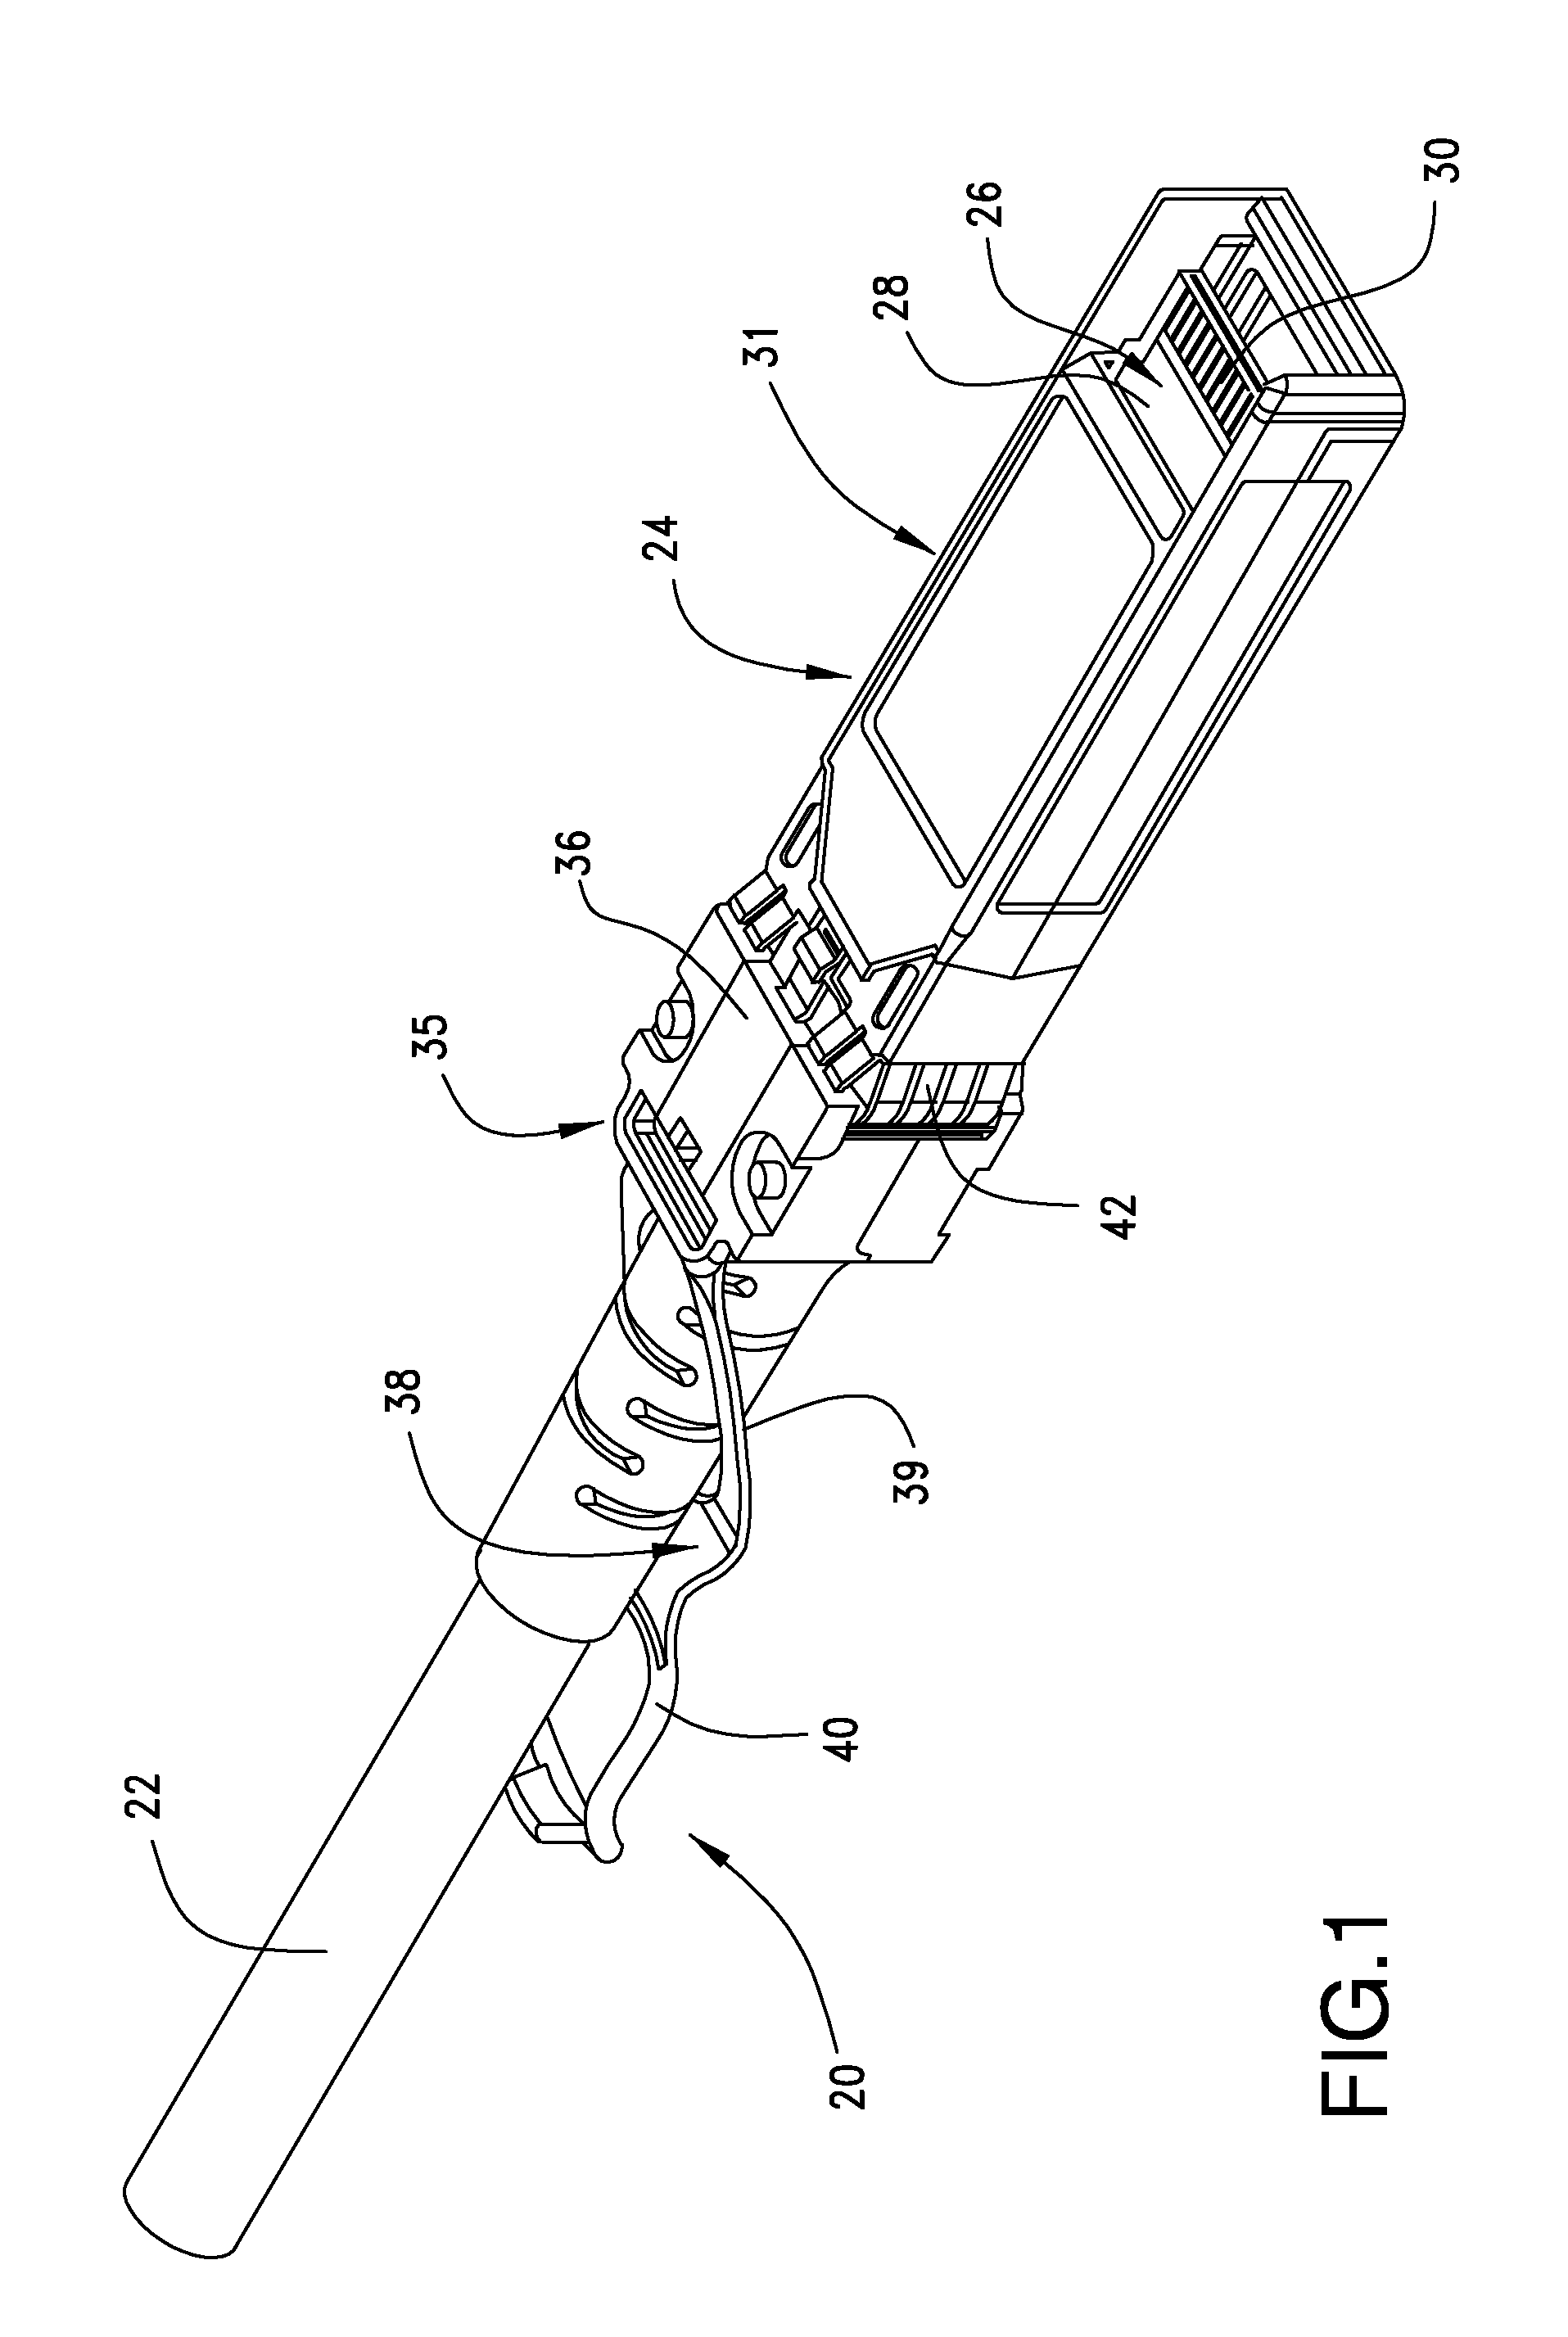 Connector guide for orienting wires for termination